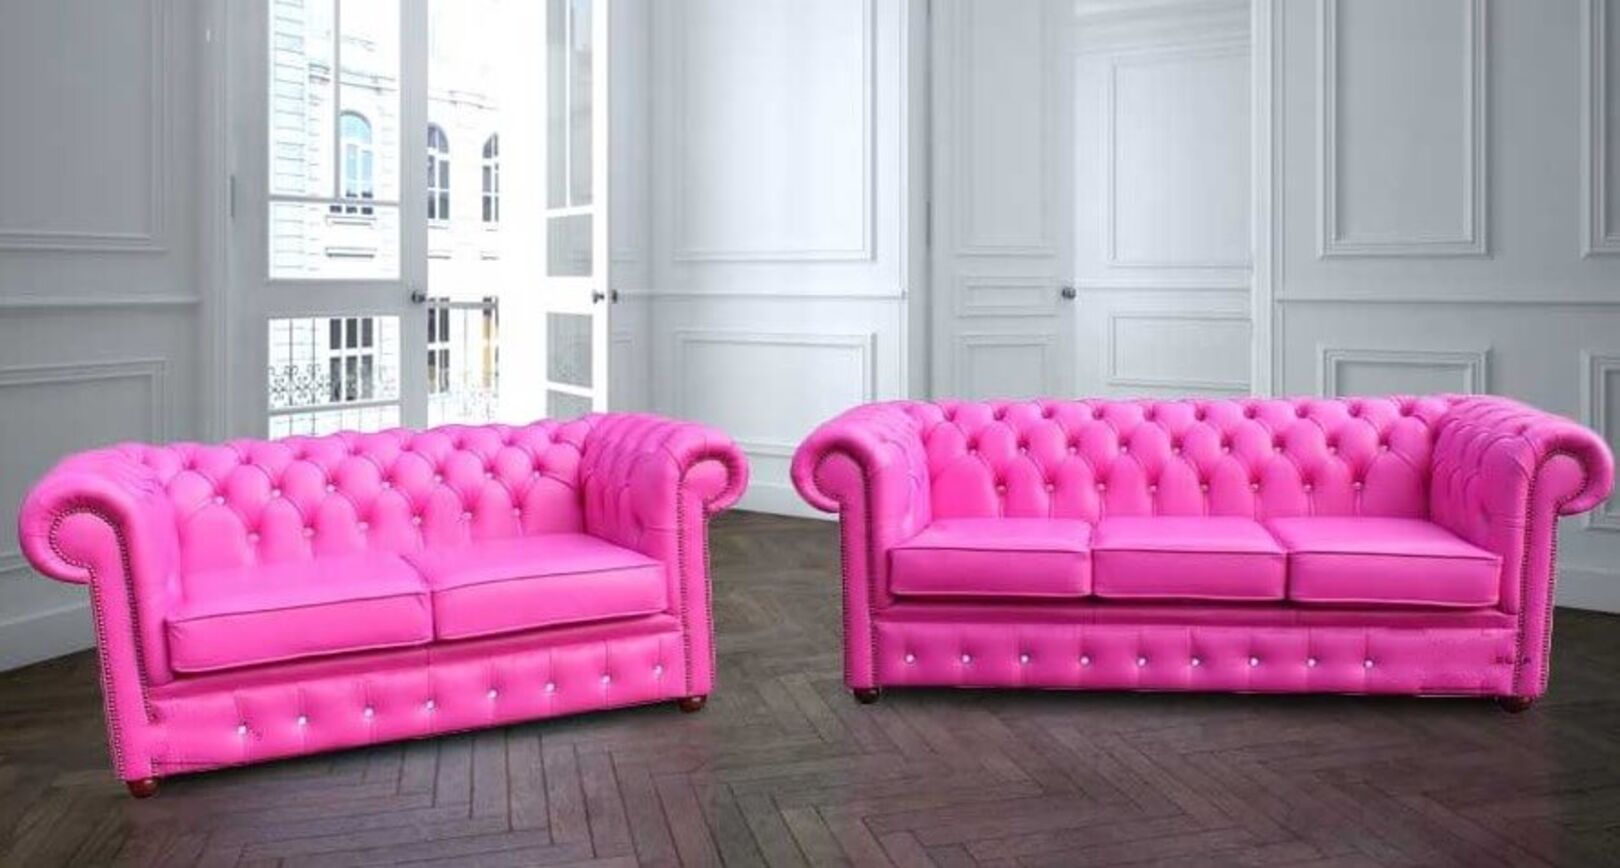 Pink Leather Chesterfield Sofa Suite, Bright Pink Leather Sofa